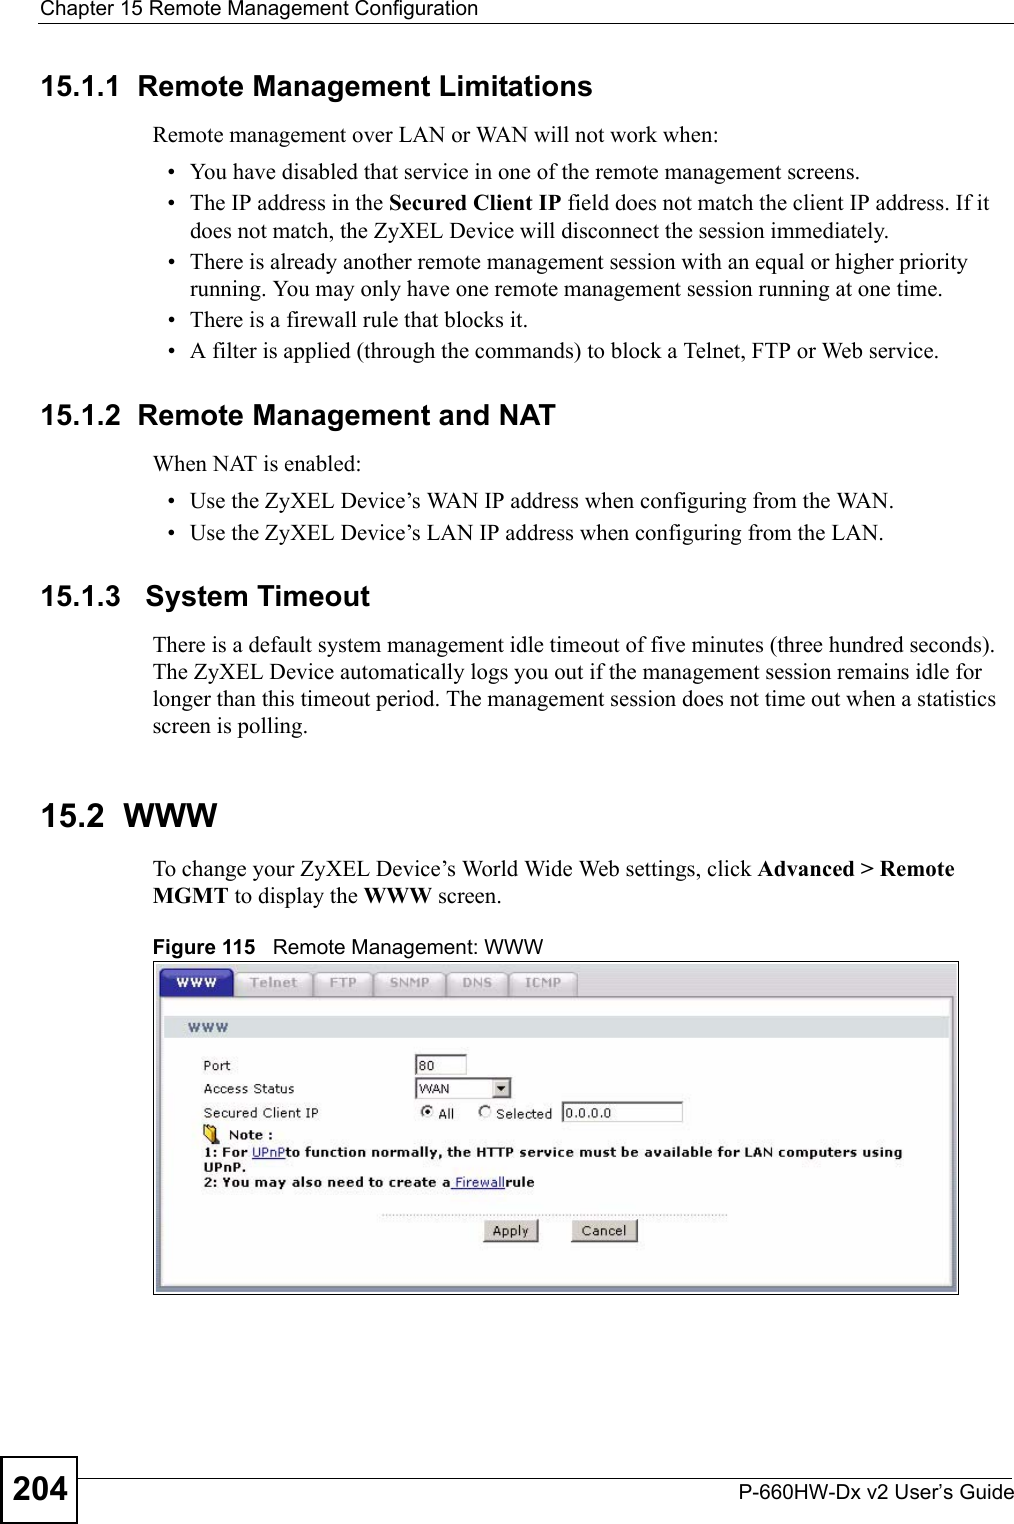 Chapter 15 Remote Management ConfigurationP-660HW-Dx v2 User’s Guide20415.1.1  Remote Management LimitationsRemote management over LAN or WAN will not work when:• You have disabled that service in one of the remote management screens.• The IP address in the Secured Client IP field does not match the client IP address. If it does not match, the ZyXEL Device will disconnect the session immediately.• There is already another remote management session with an equal or higher priority running. You may only have one remote management session running at one time.• There is a firewall rule that blocks it.• A filter is applied (through the commands) to block a Telnet, FTP or Web service. 15.1.2  Remote Management and NATWhen NAT is enabled:• Use the ZyXEL Device’s WAN IP address when configuring from the WAN. • Use the ZyXEL Device’s LAN IP address when configuring from the LAN.15.1.3   System TimeoutThere is a default system management idle timeout of five minutes (three hundred seconds). The ZyXEL Device automatically logs you out if the management session remains idle for longer than this timeout period. The management session does not time out when a statistics screen is polling. 15.2  WWWTo change your ZyXEL Device’s World Wide Web settings, click Advanced &gt; Remote MGMT to display the WWW screen.Figure 115   Remote Management: WWW